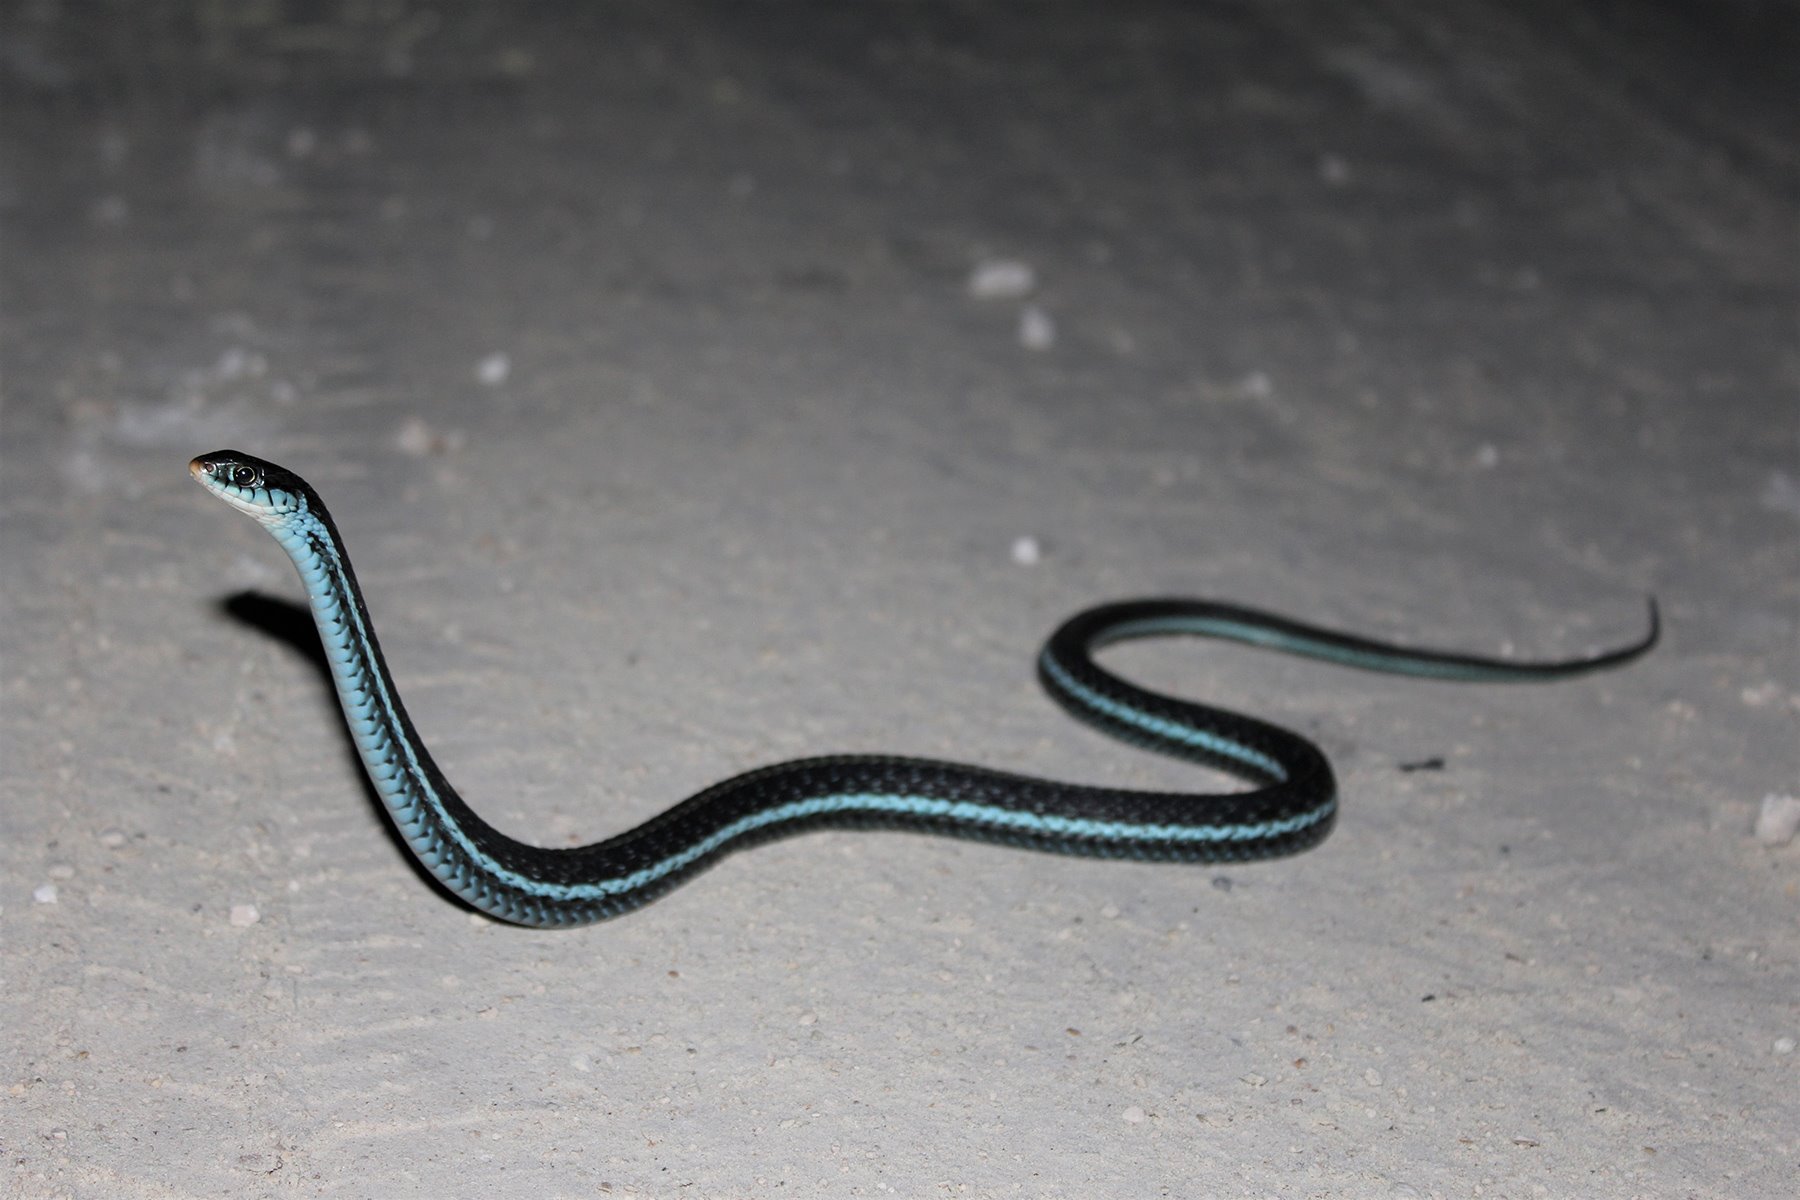 Discover The Mesmerizing Black Snake With A Stunning Blue Belly!